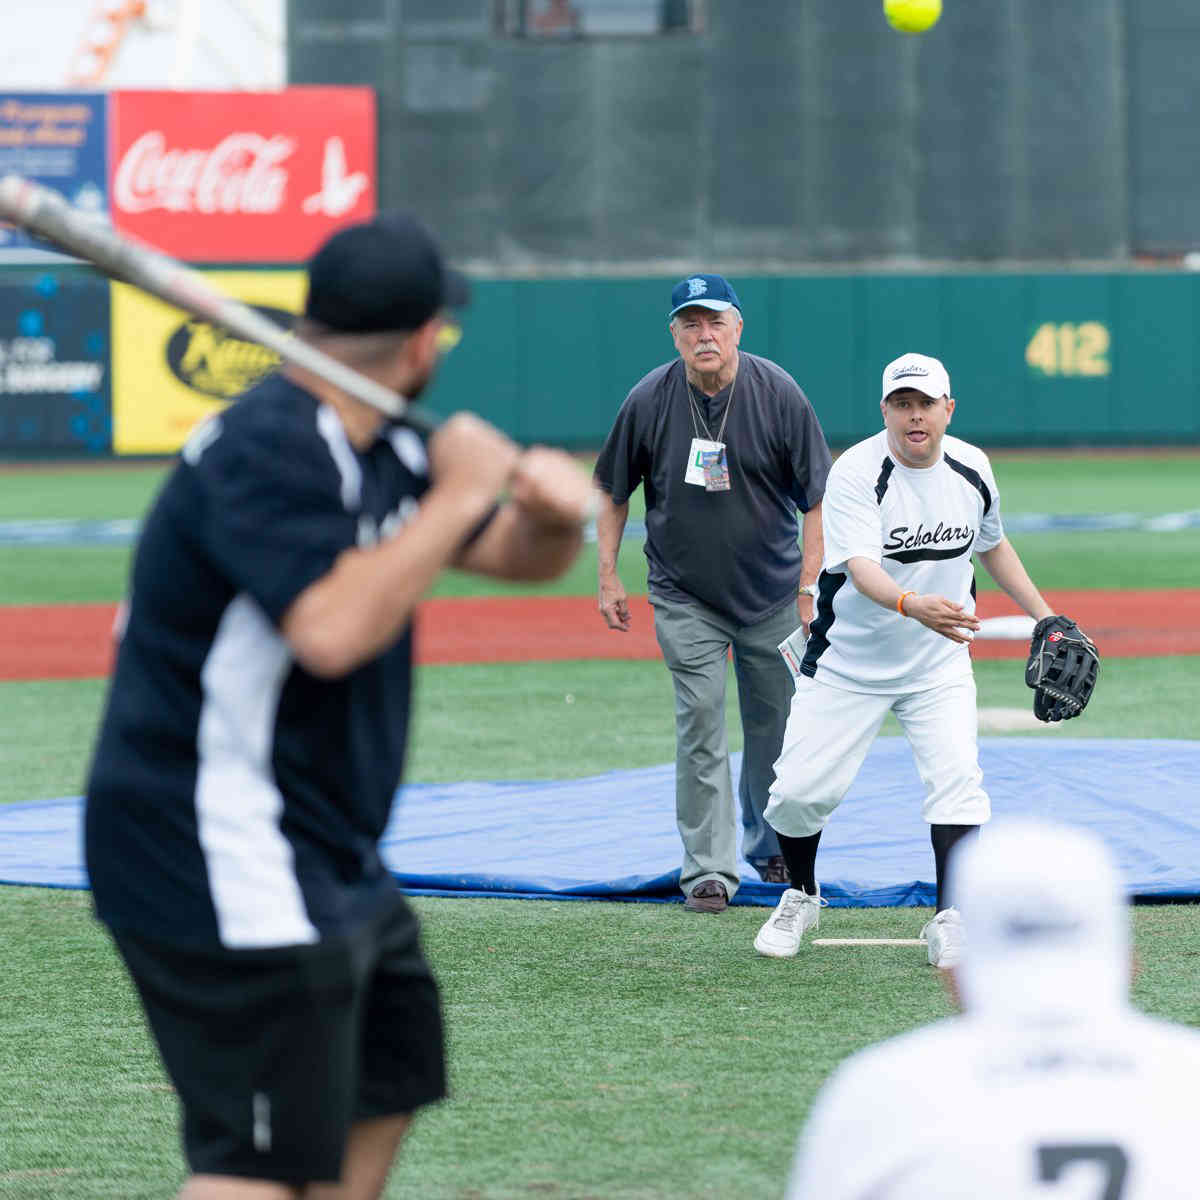 Heavy hitters: Priests and Catholic school teachers face off in annual baseball game at MCU Park